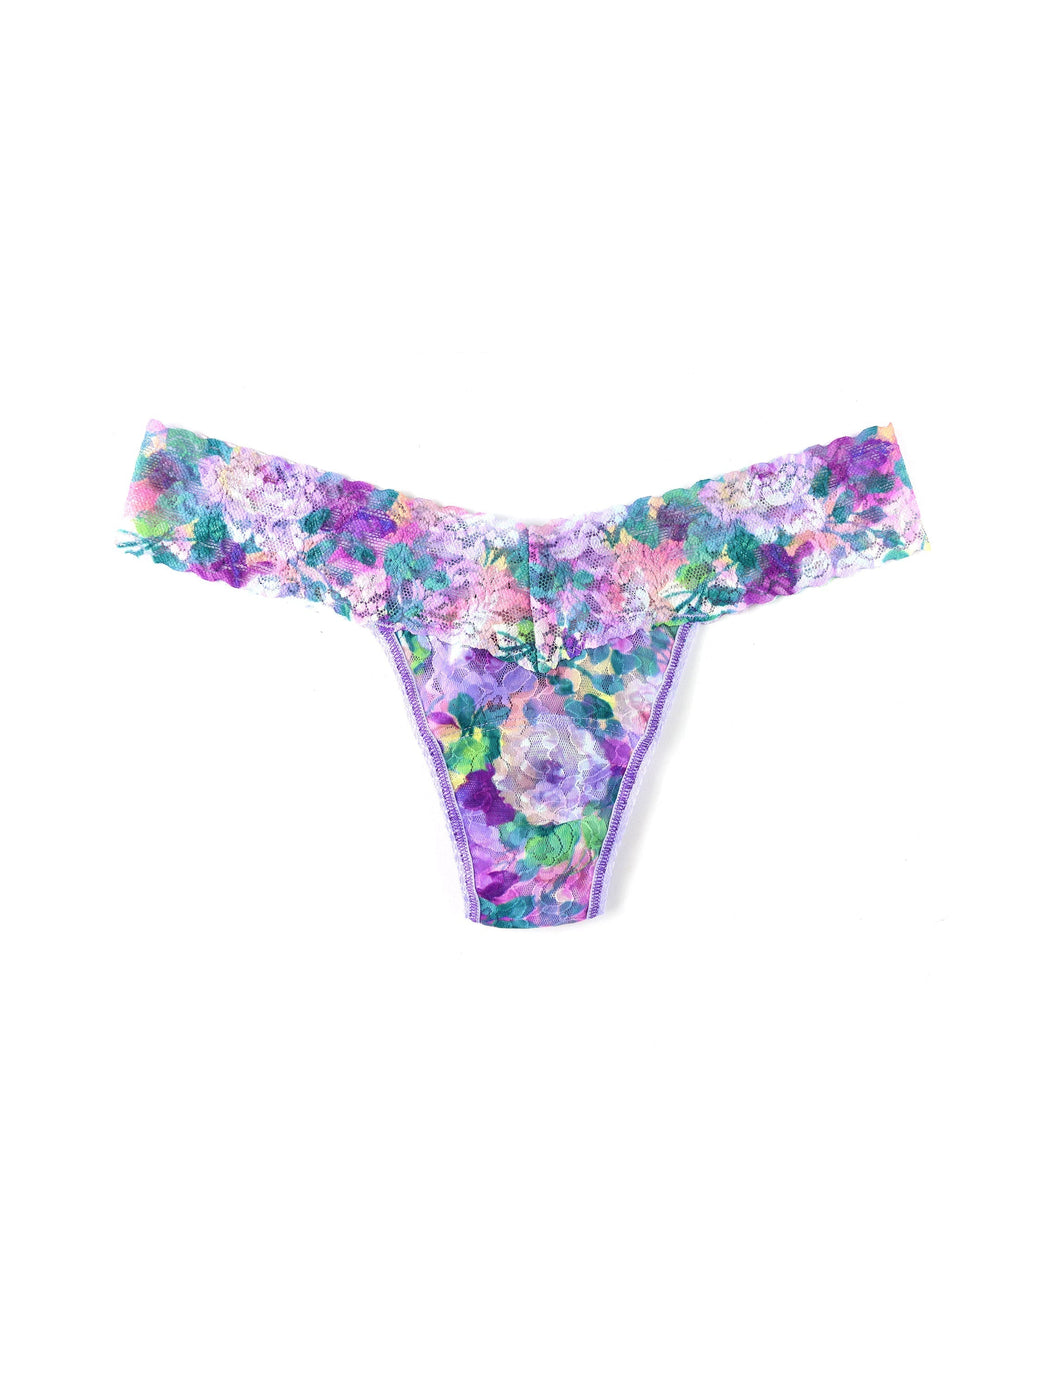 Printed Signature Lace Low Rise Thong Bathe in Petals Sale